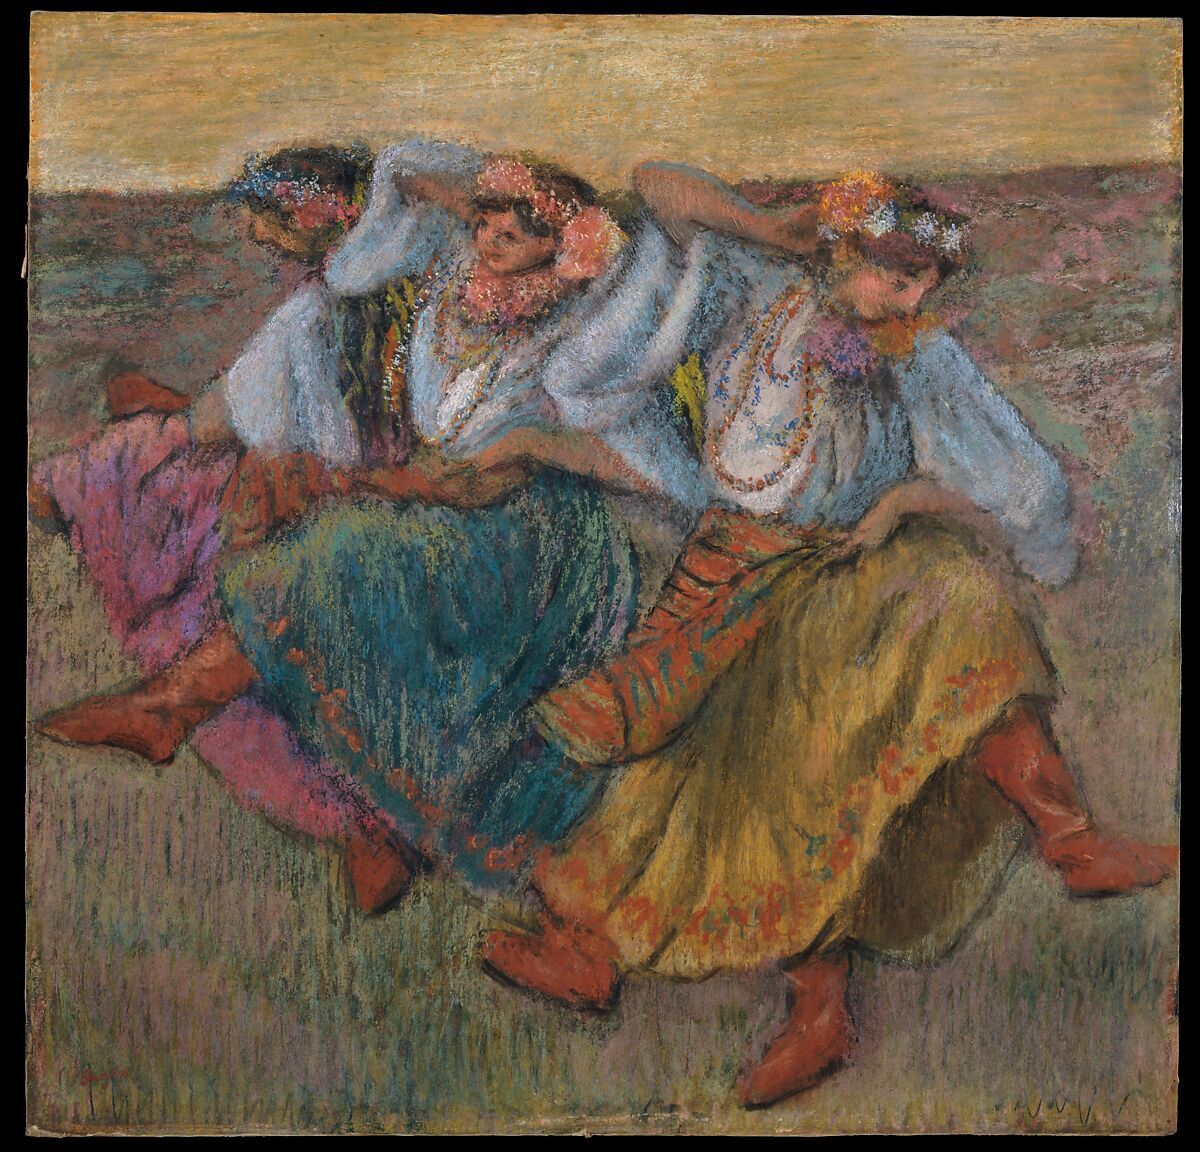 Around 1899, Edgar Degas was working on a series of paintings depicting folk dancers from the Russian Empire. While the French Impressionist is best k